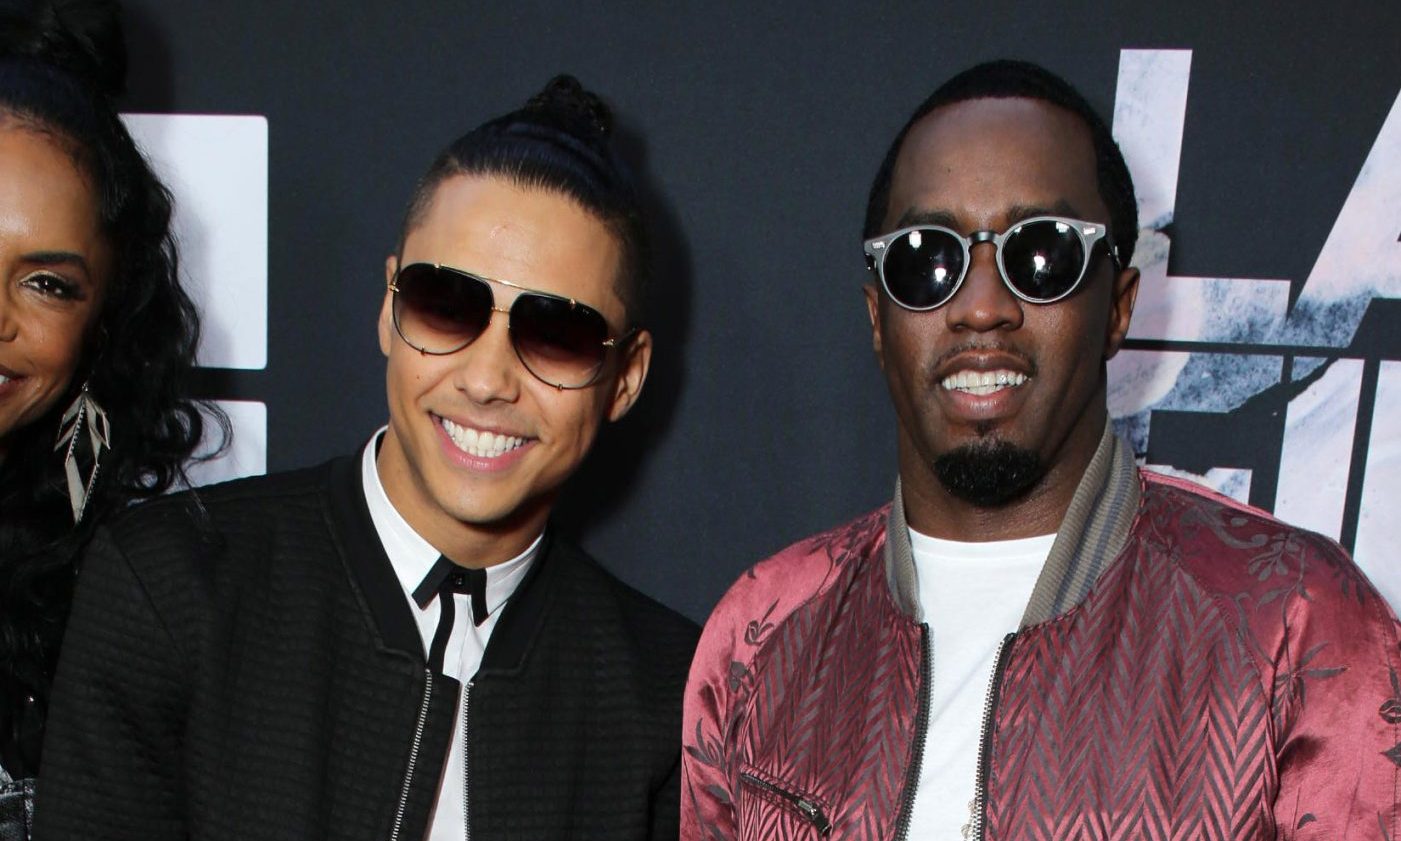 Where He At!? Quincy Trends Online Amid Reports Of Diddy’s Homes Being Raided thumbnail